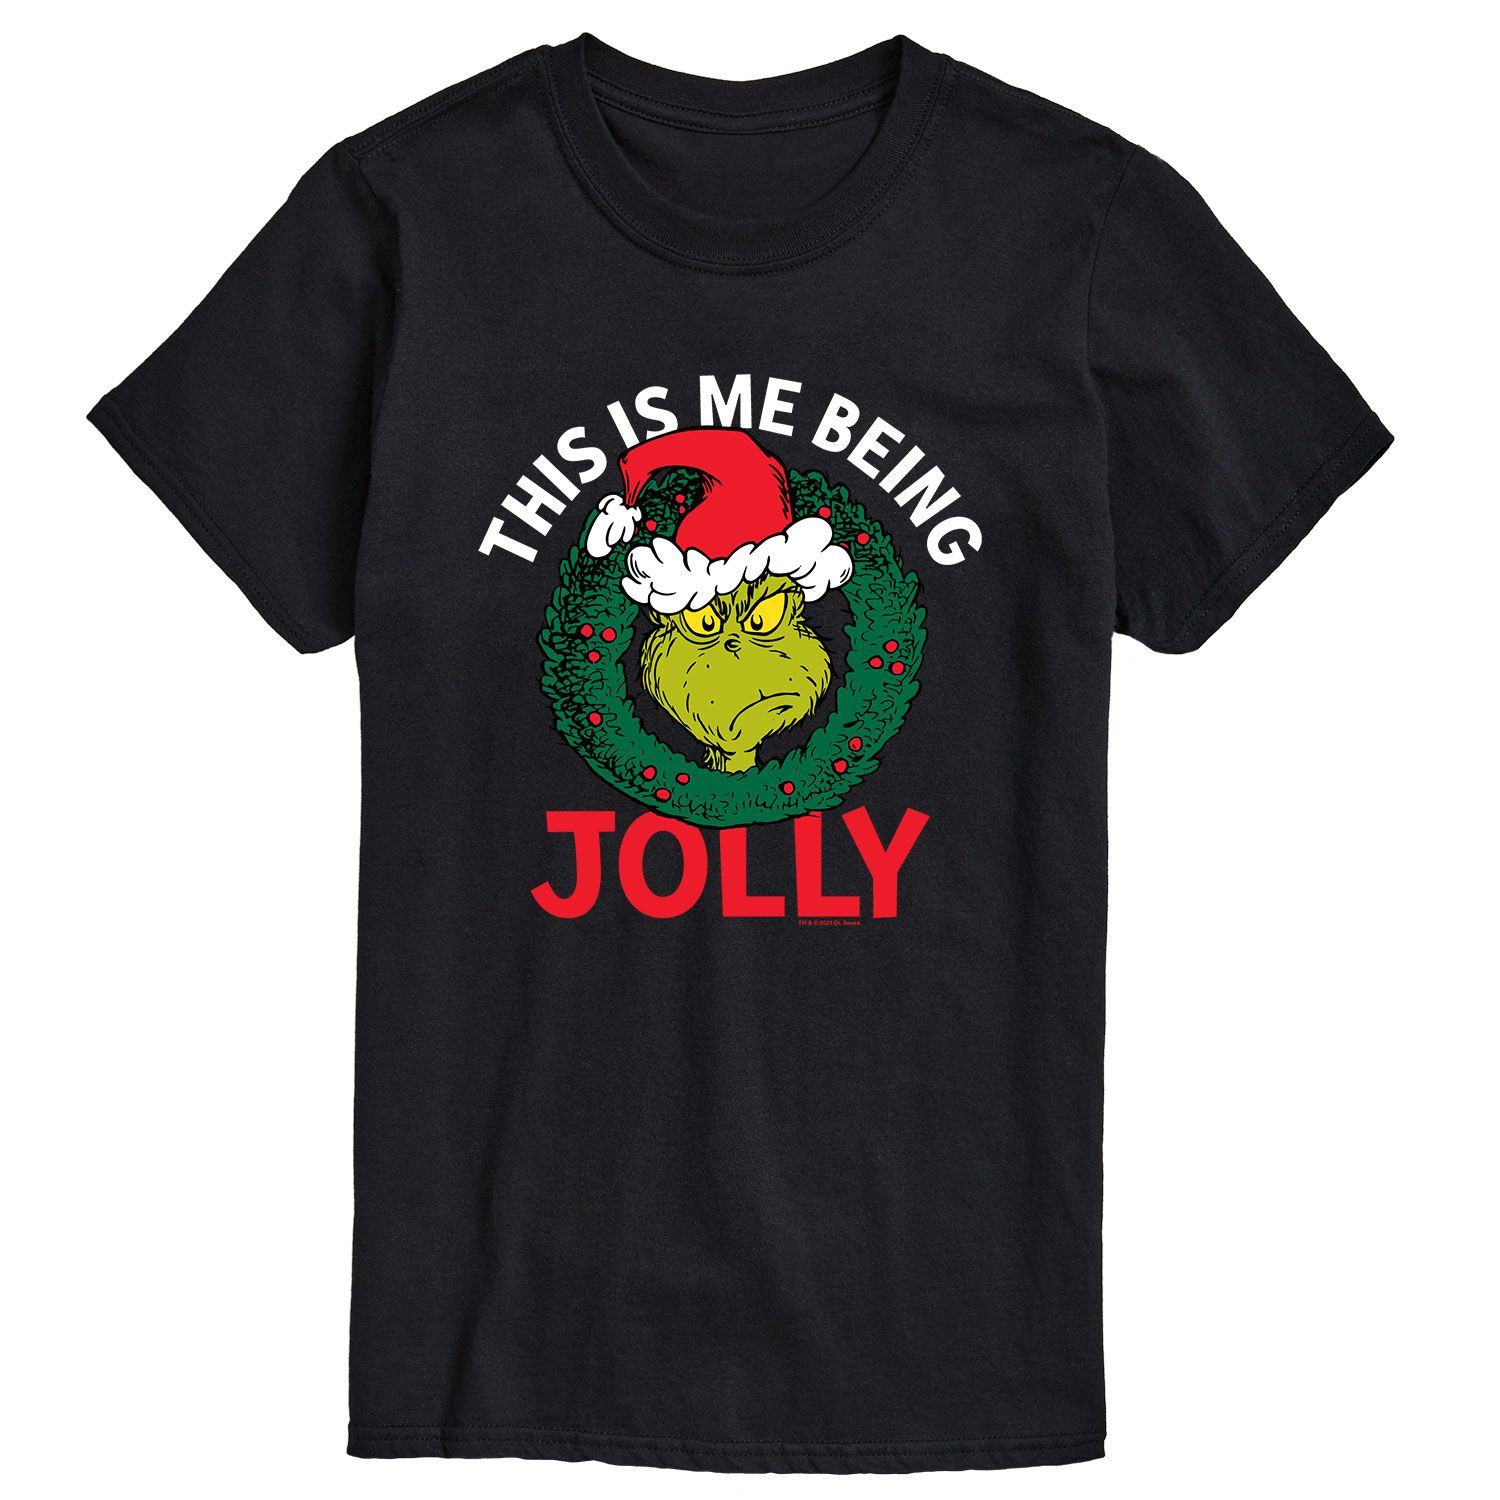 hissey jane jolly tall Футболка Big & Tall Me Thebeing Jolly, Black Licensed Character, черный